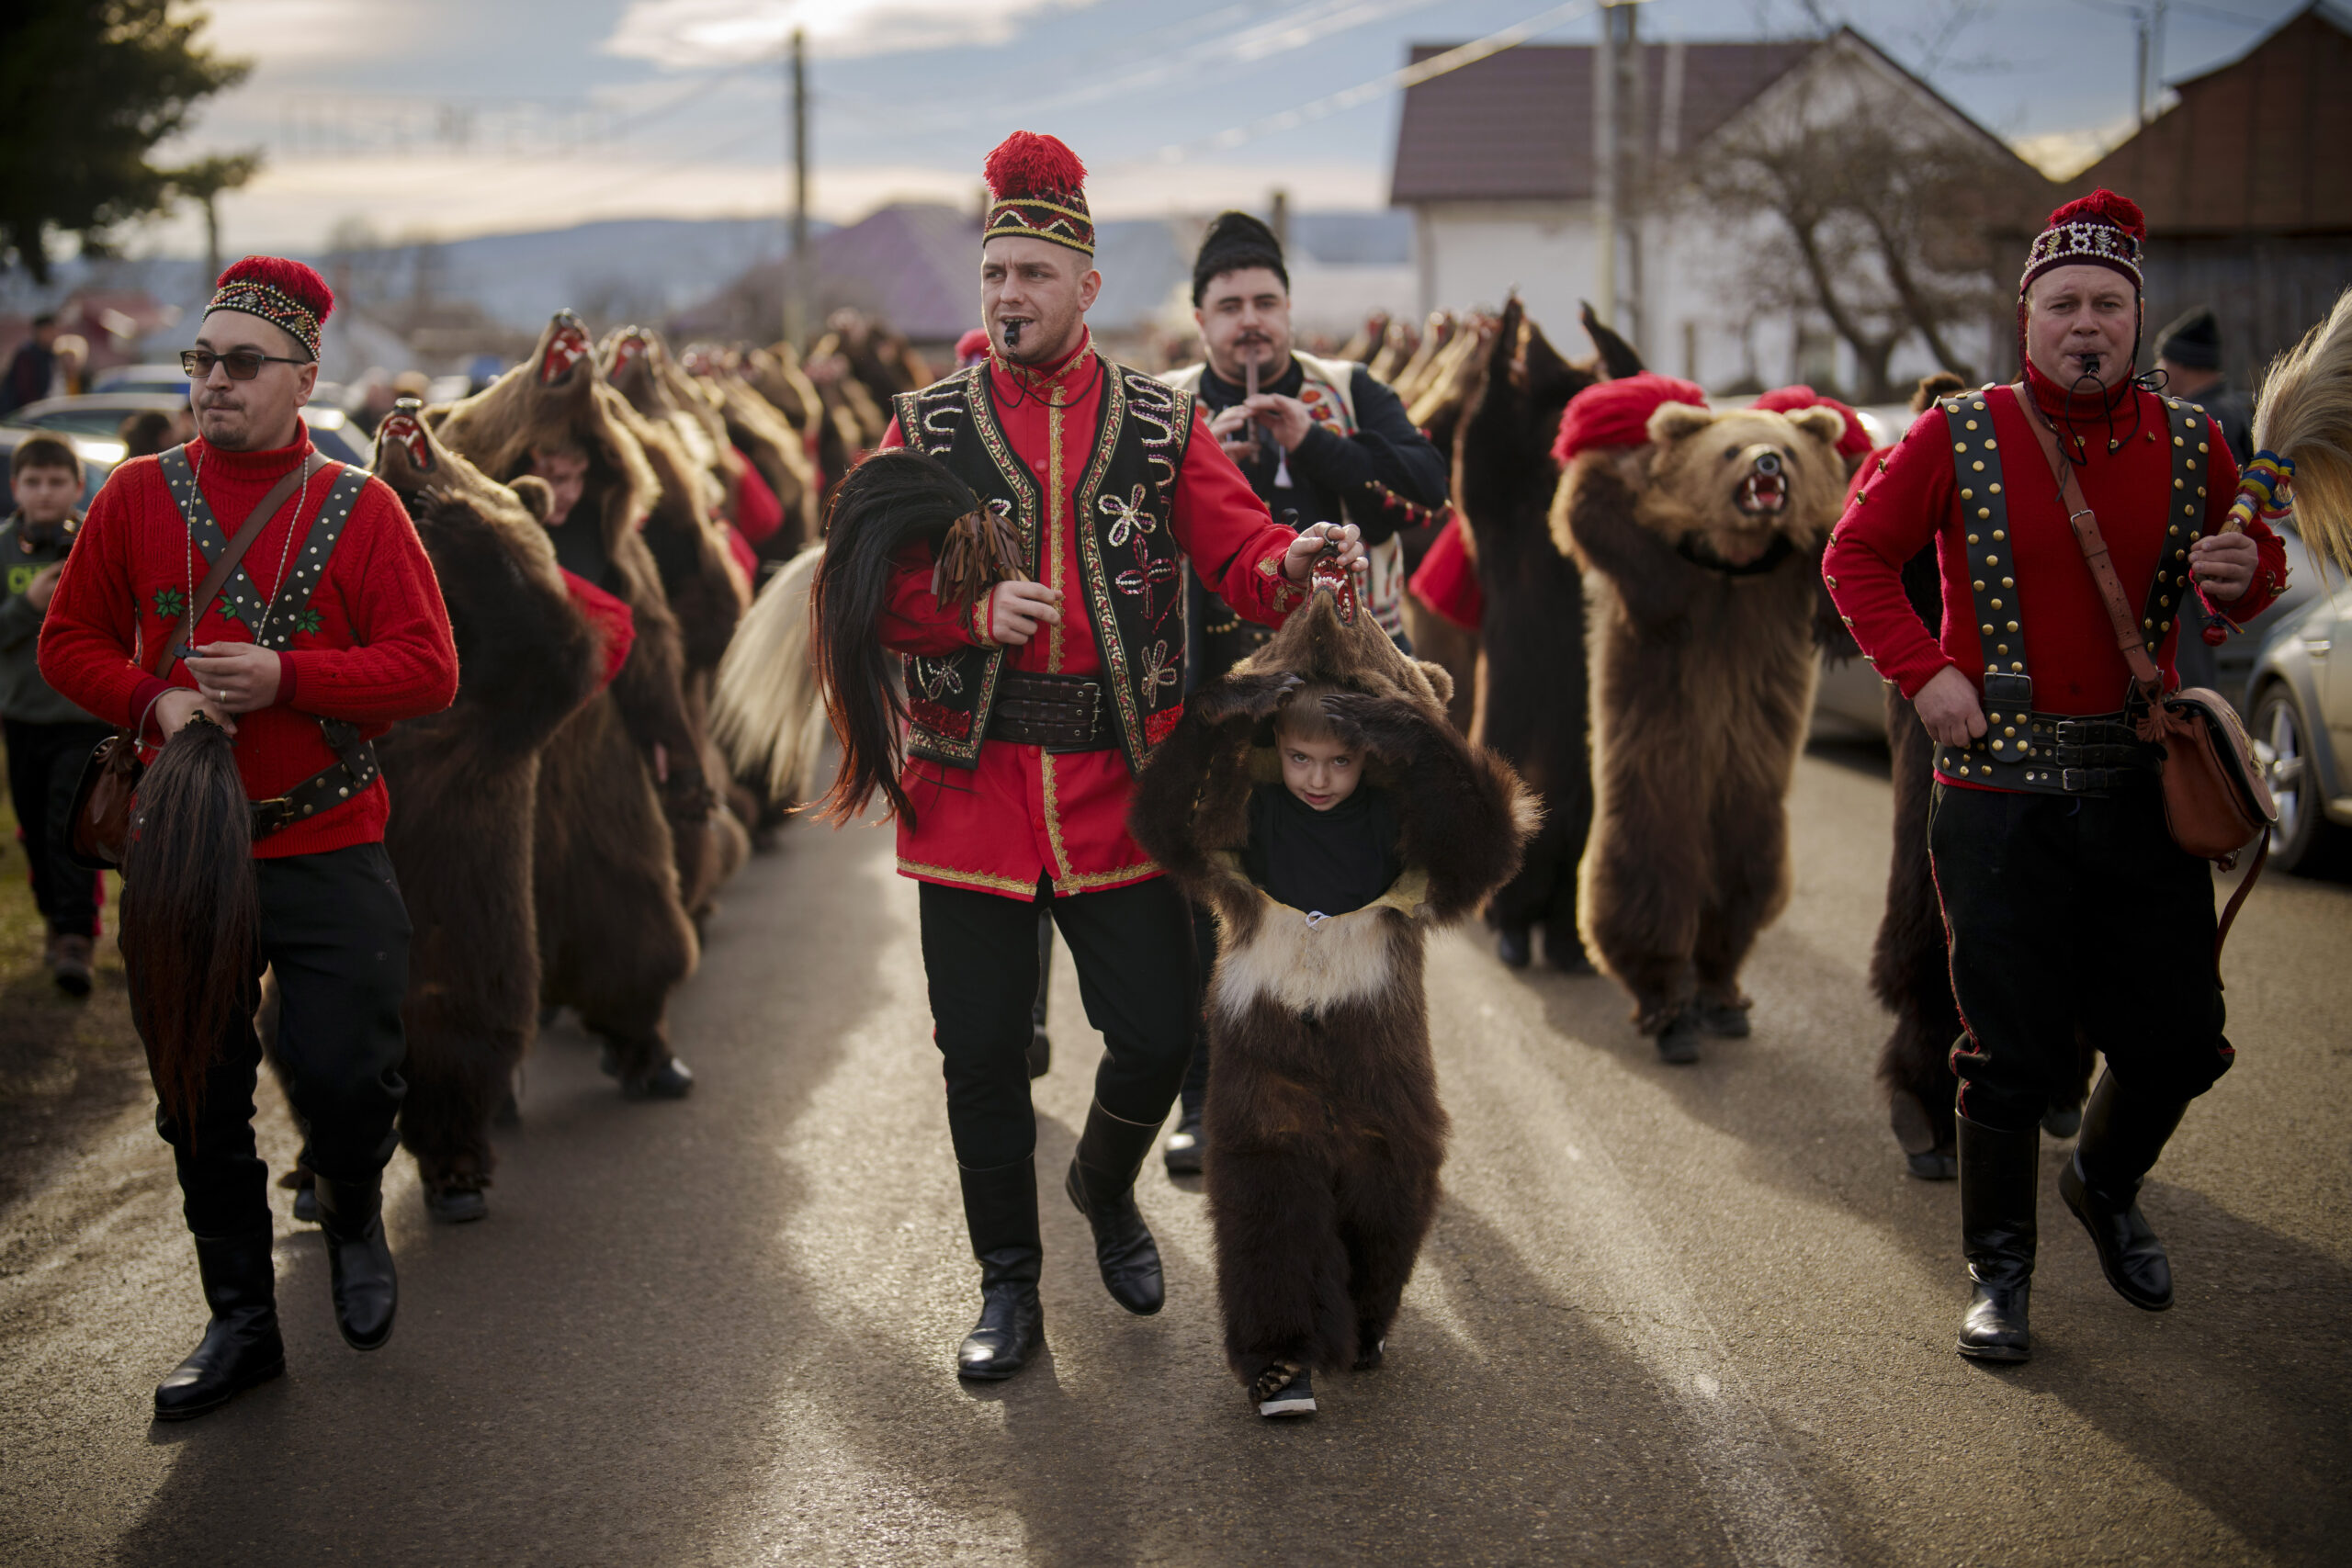 ROMANIA — Remnants of sacrificed bears, for ritual parades and dances: Members of the Sipoteni bear pack, wearing bear fur costumes, walk on a road before performing their dance for villagers in Racova, northern Romania, Tuesday, Dec. 26, 2023. The dancing bears tradition originates from the pre-Christian era, when dancers wearing colored costumes or animal furs toured from house to house in villages, singing and dancing to ward off evil.Photo: Vadim Ghirda/AP